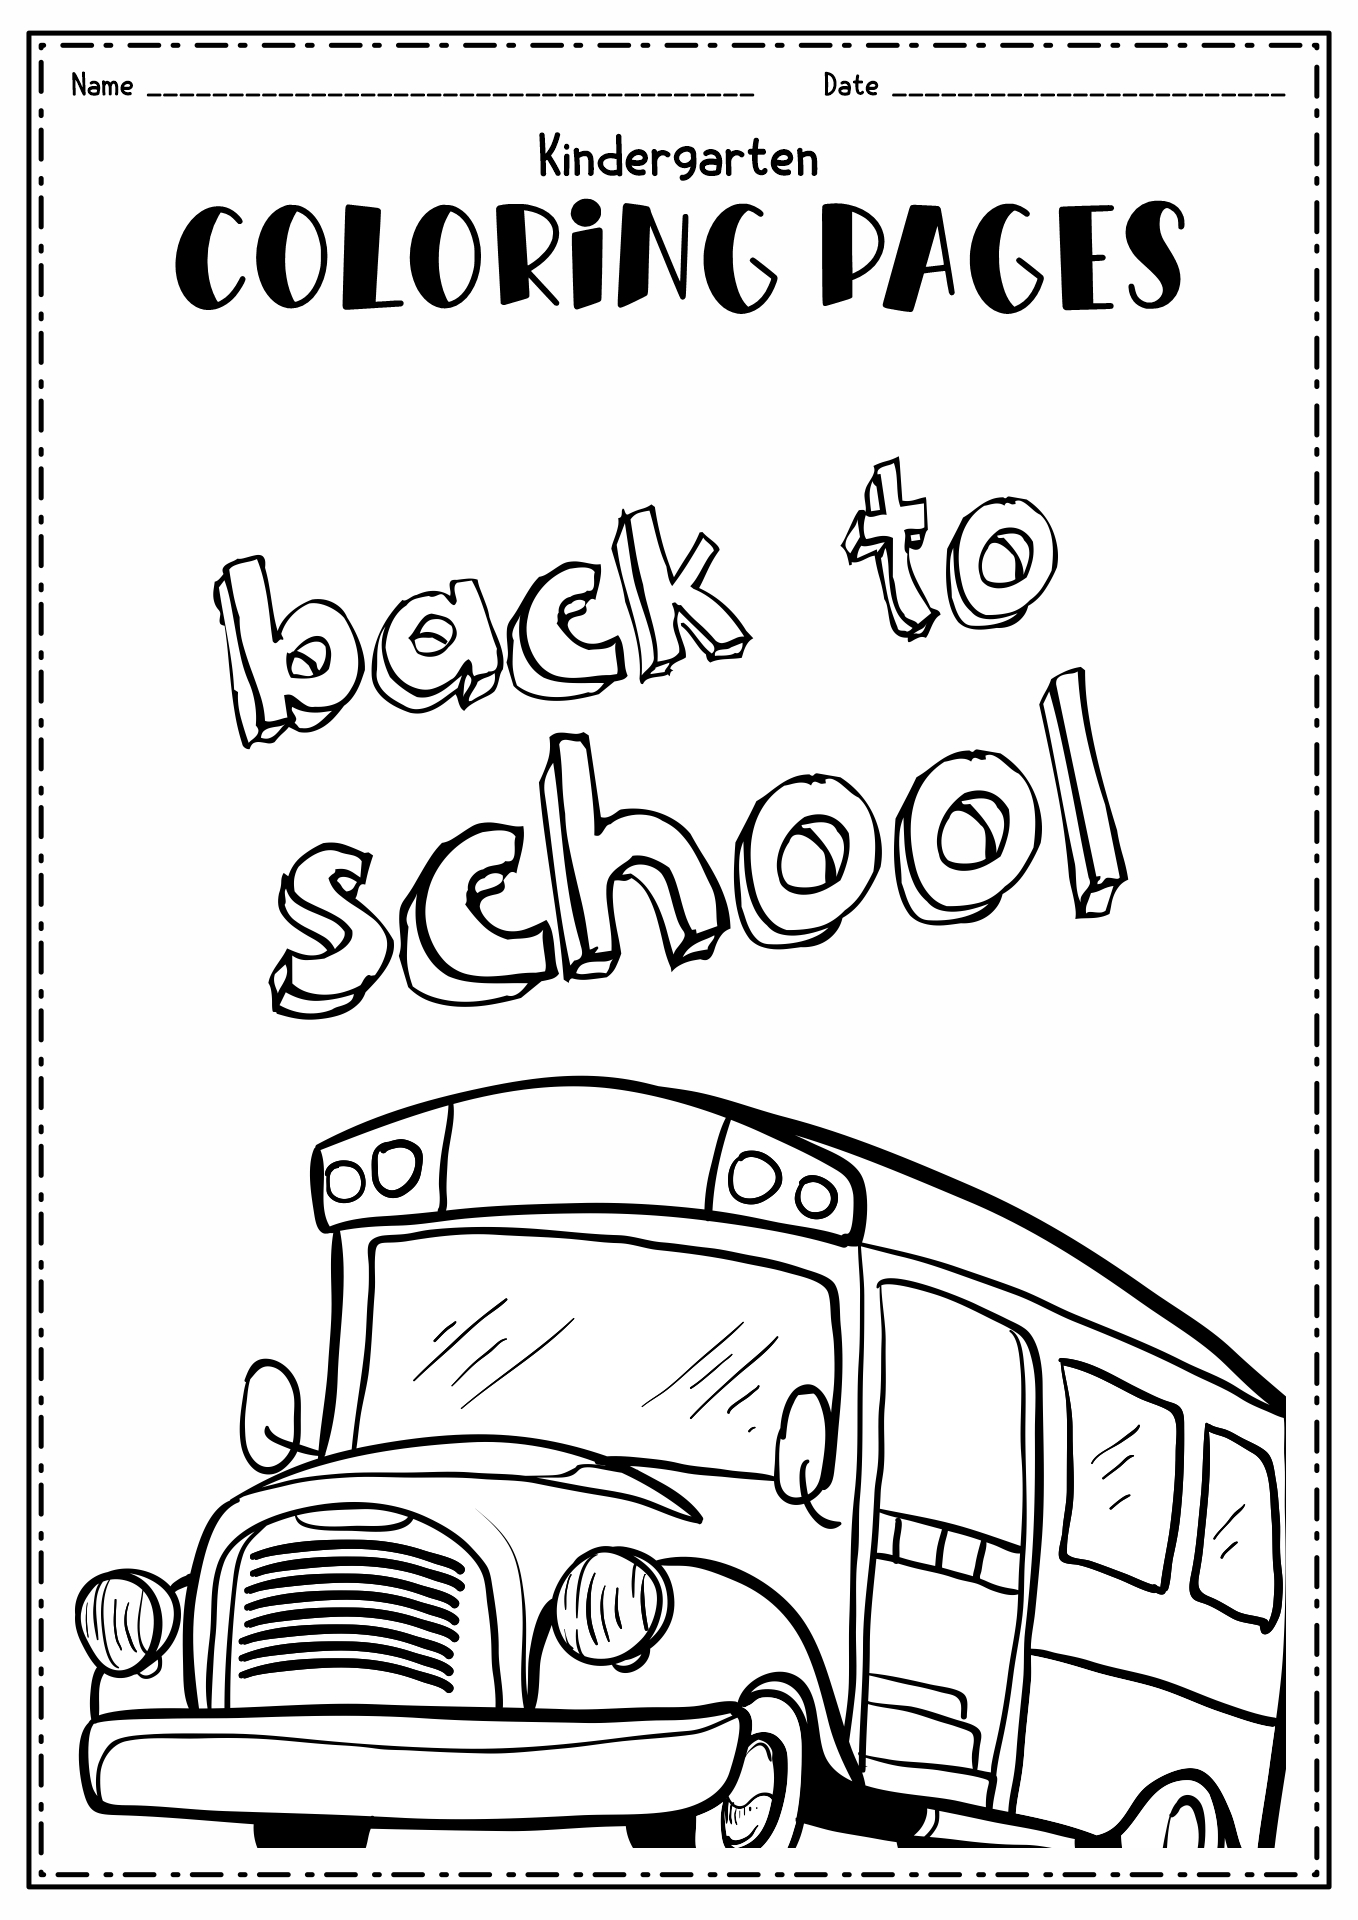 Back to School Coloring Pages Printable